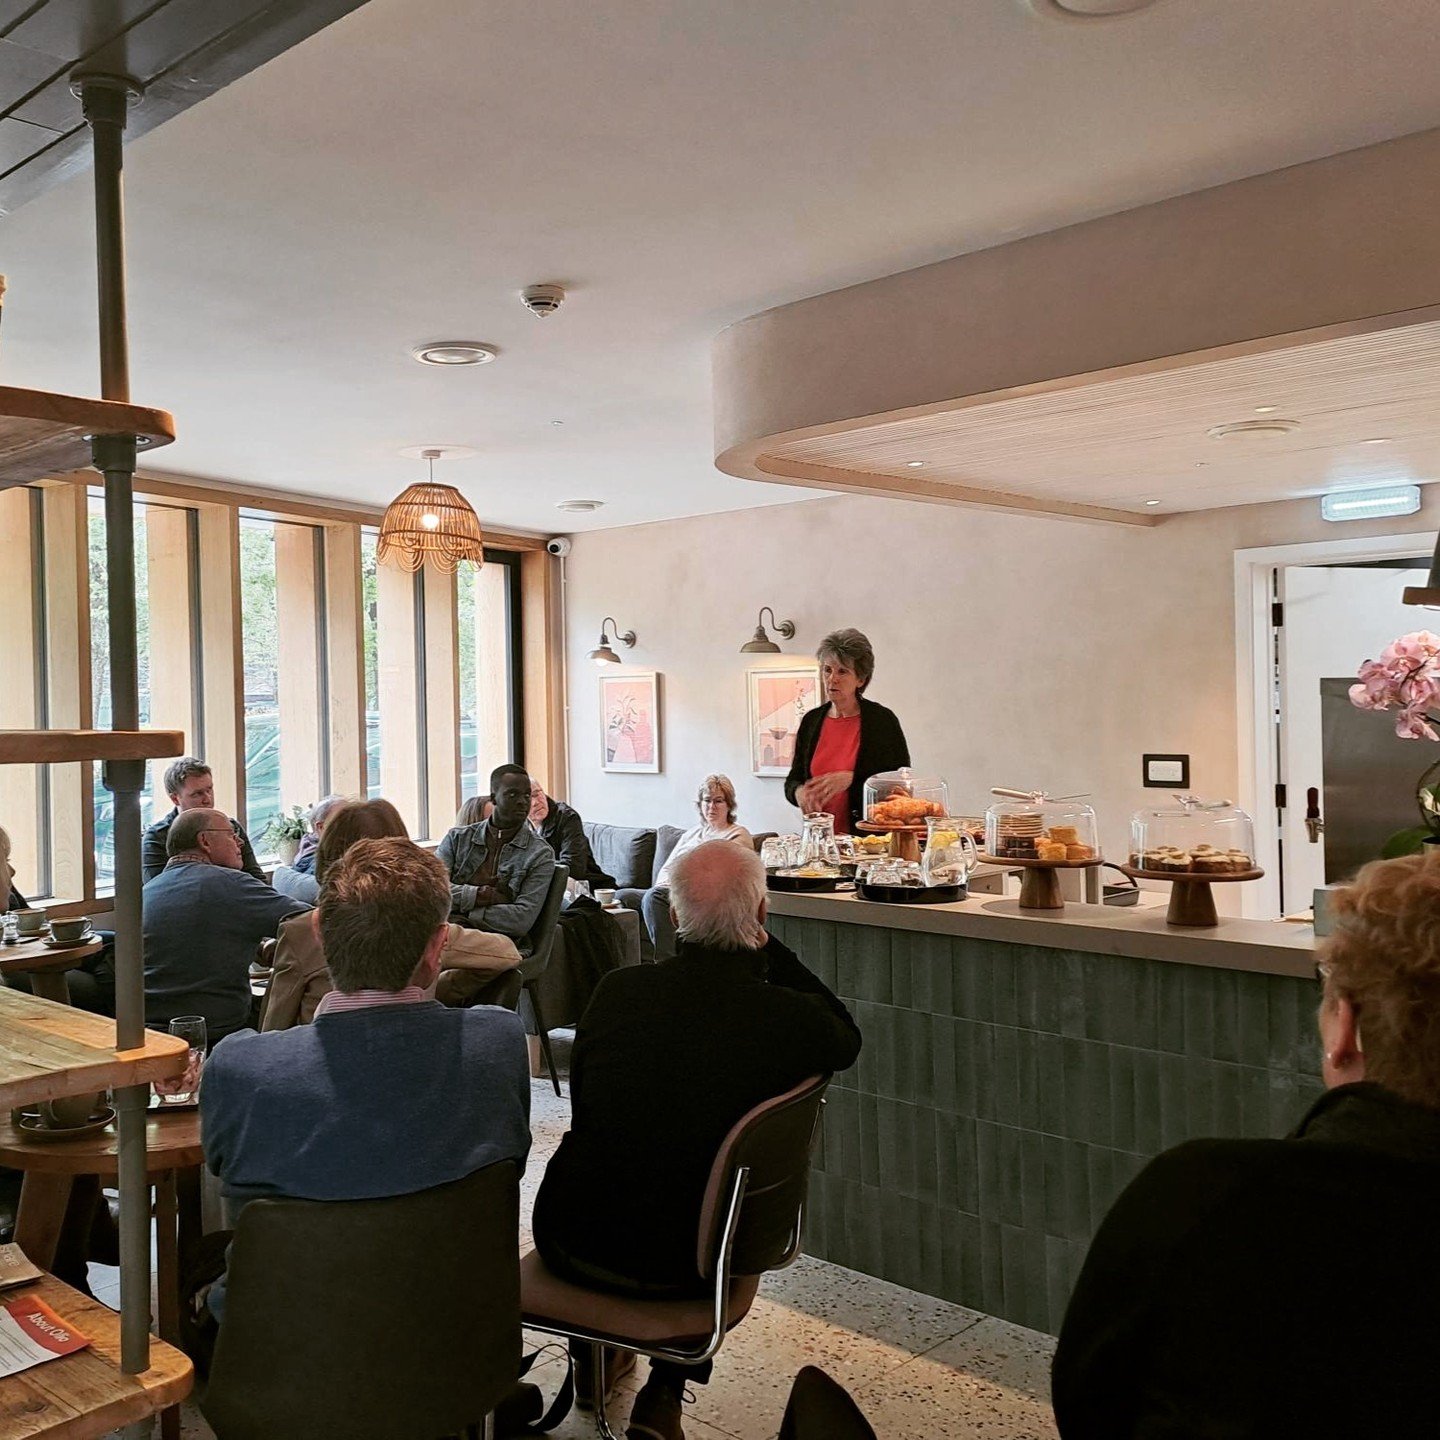 Last week we were delighted to host @winchrotaryuk and share more about #HopeStreet with them - as well as treat them to some of the amazing food we've been making in the kitchen! Thank you Winchester Rotary for your support!🙌 

#HopeStreet #traumai